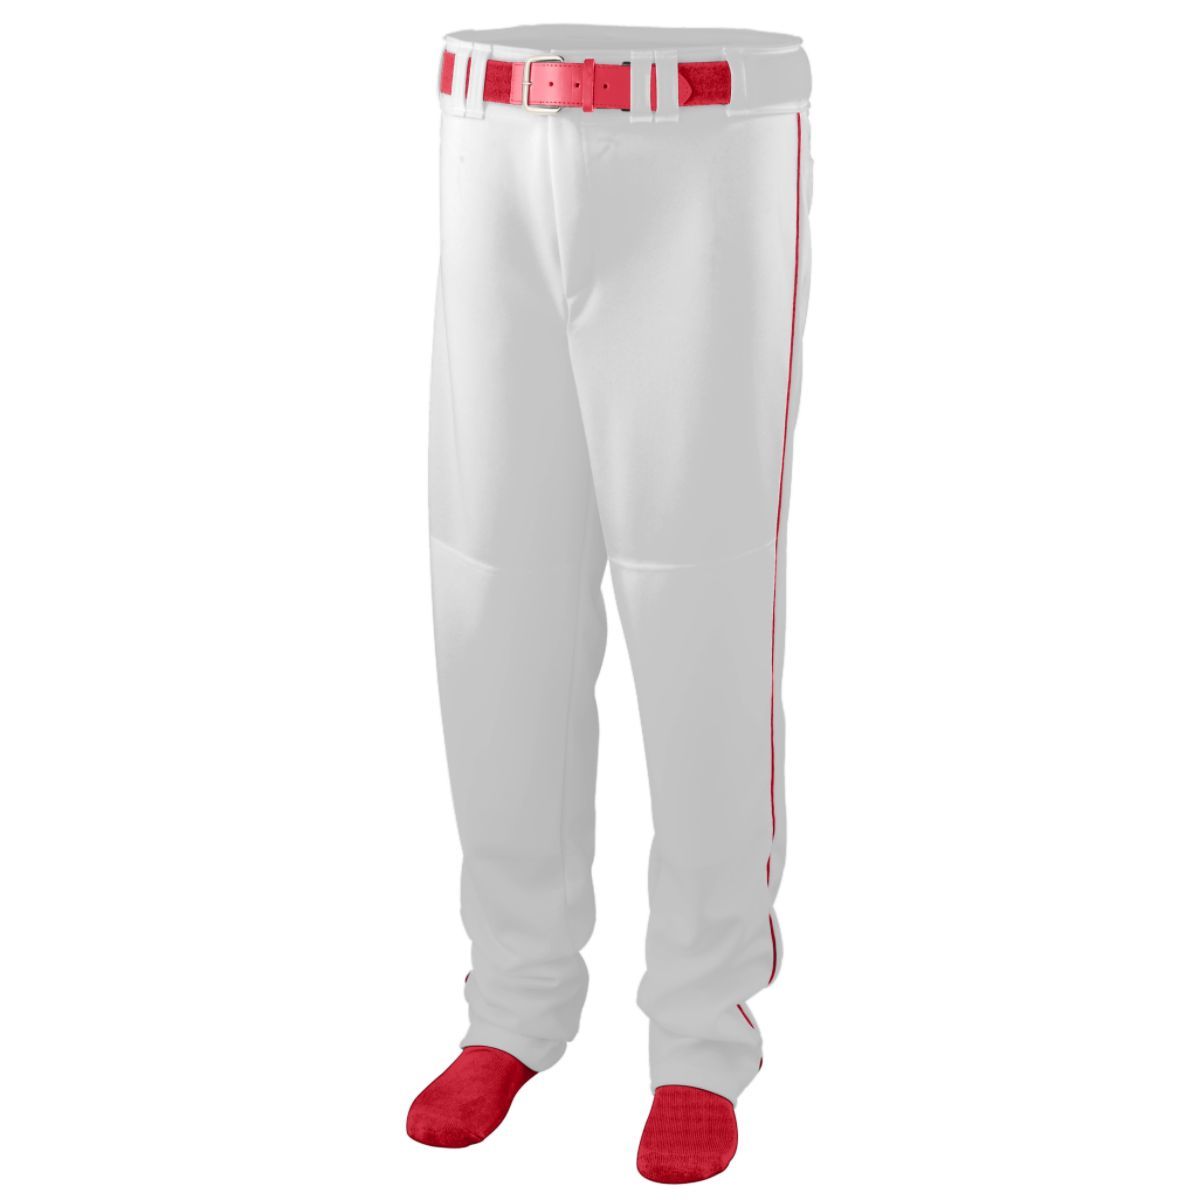 Augusta Sportswear Youth Series Baseball/Softball Pant With Piping in White/Red  -Part of the Youth, Youth-Pants, Pants, Augusta-Products, Baseball, All-Sports, All-Sports-1 product lines at KanaleyCreations.com